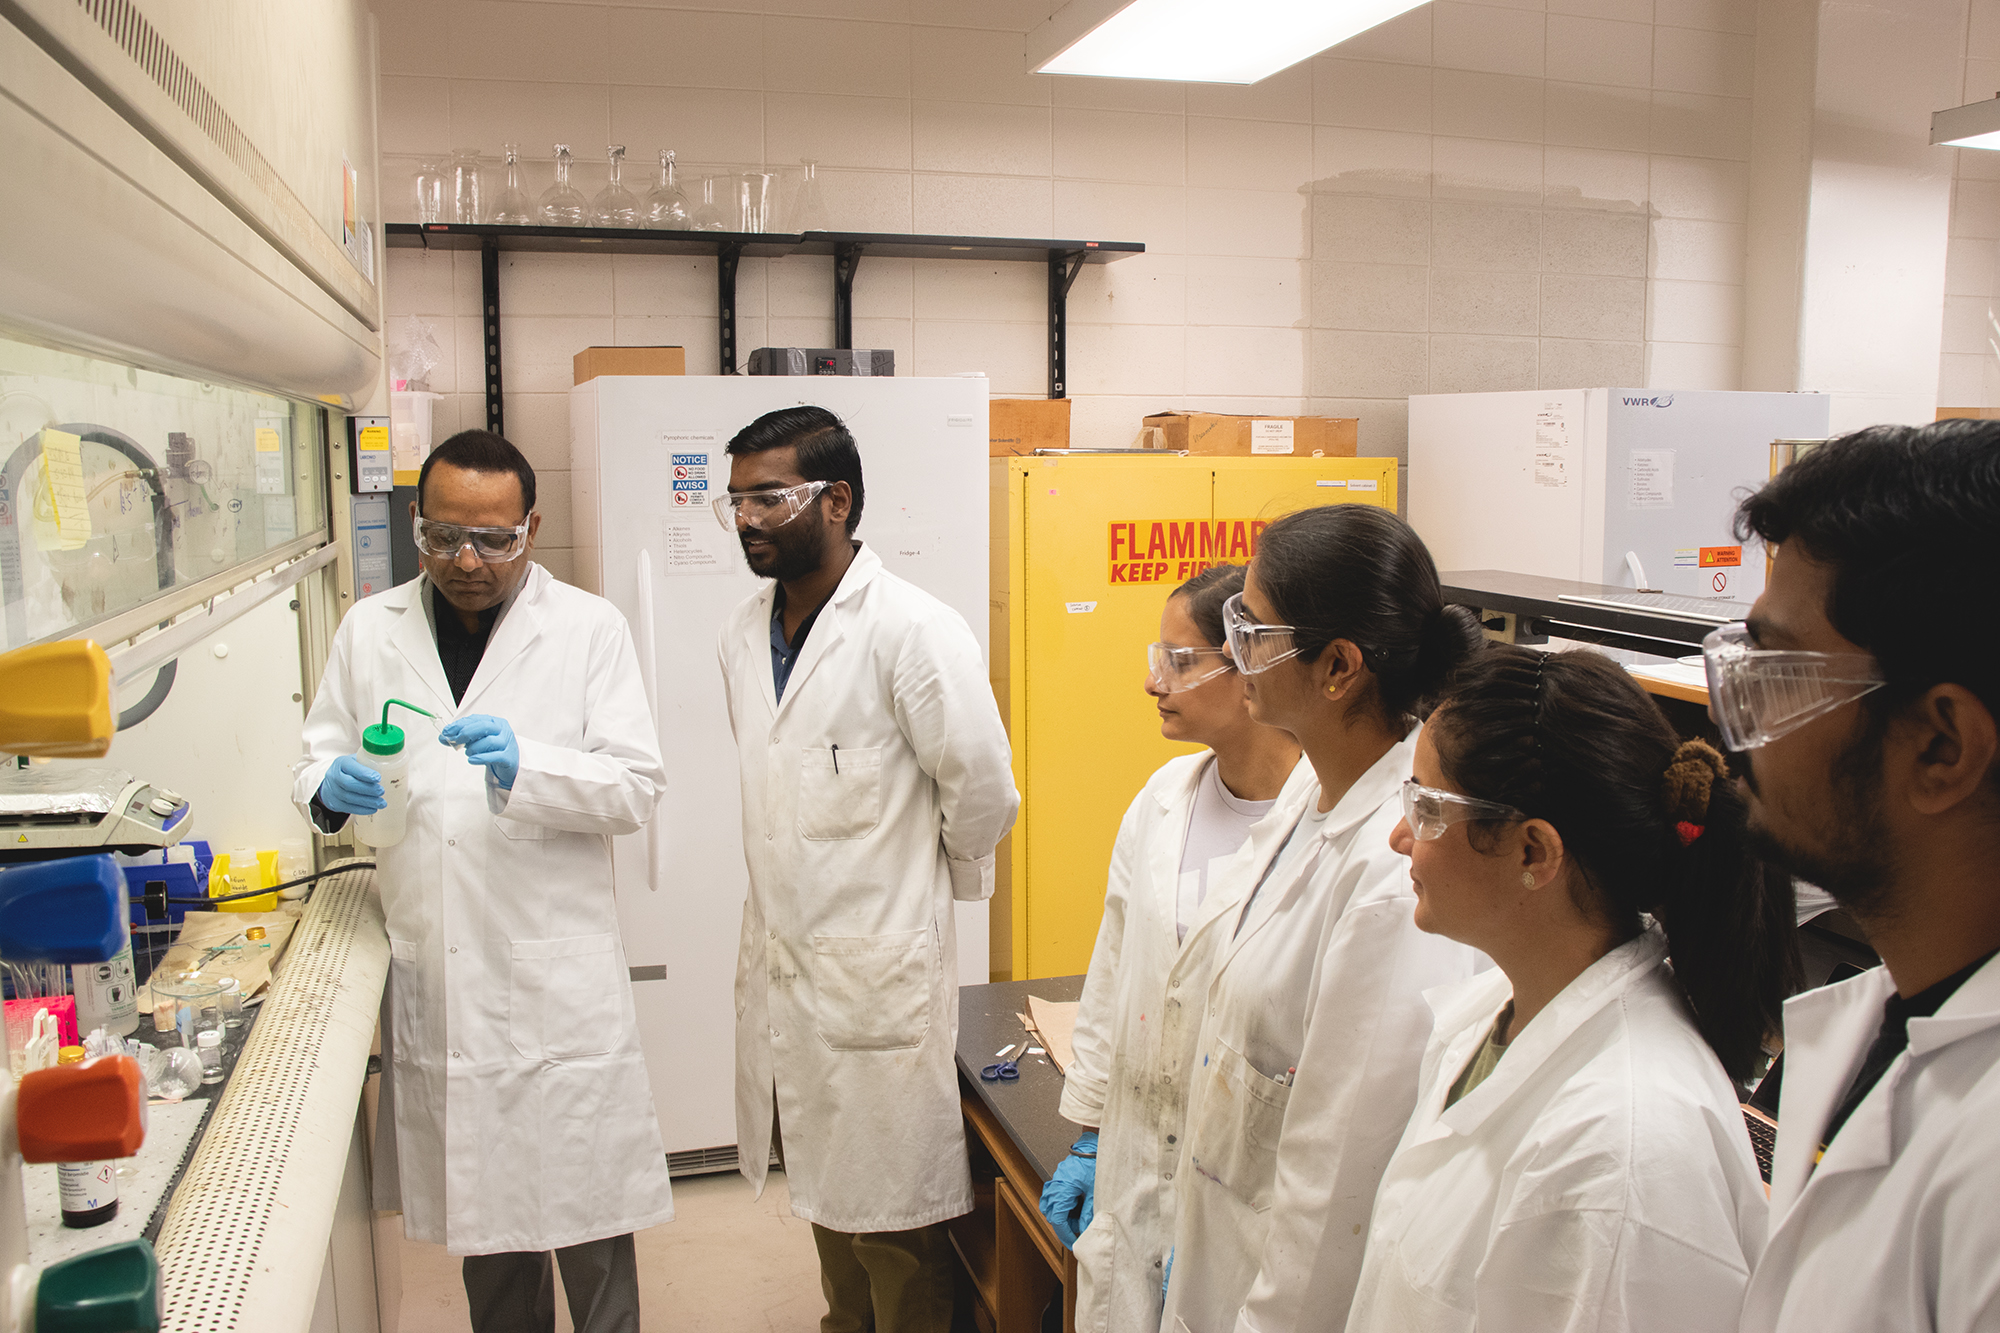 six people working in a lab environment